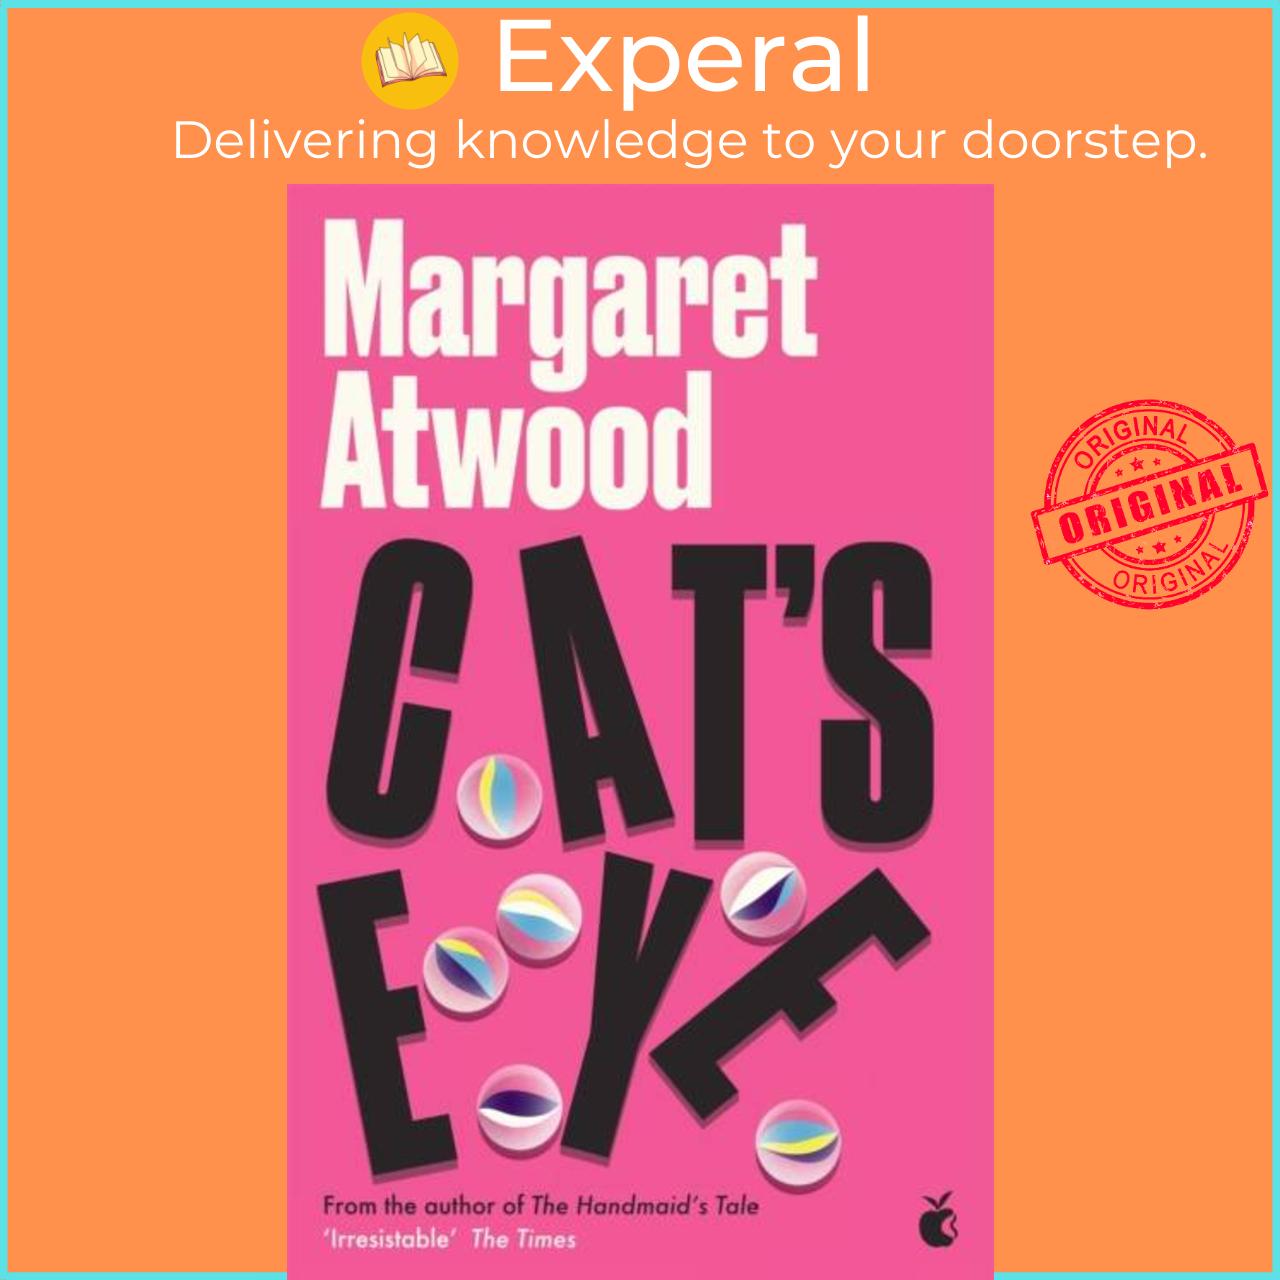 Sách - Cat's Eye by Margaret Atwood (UK edition, paperback)